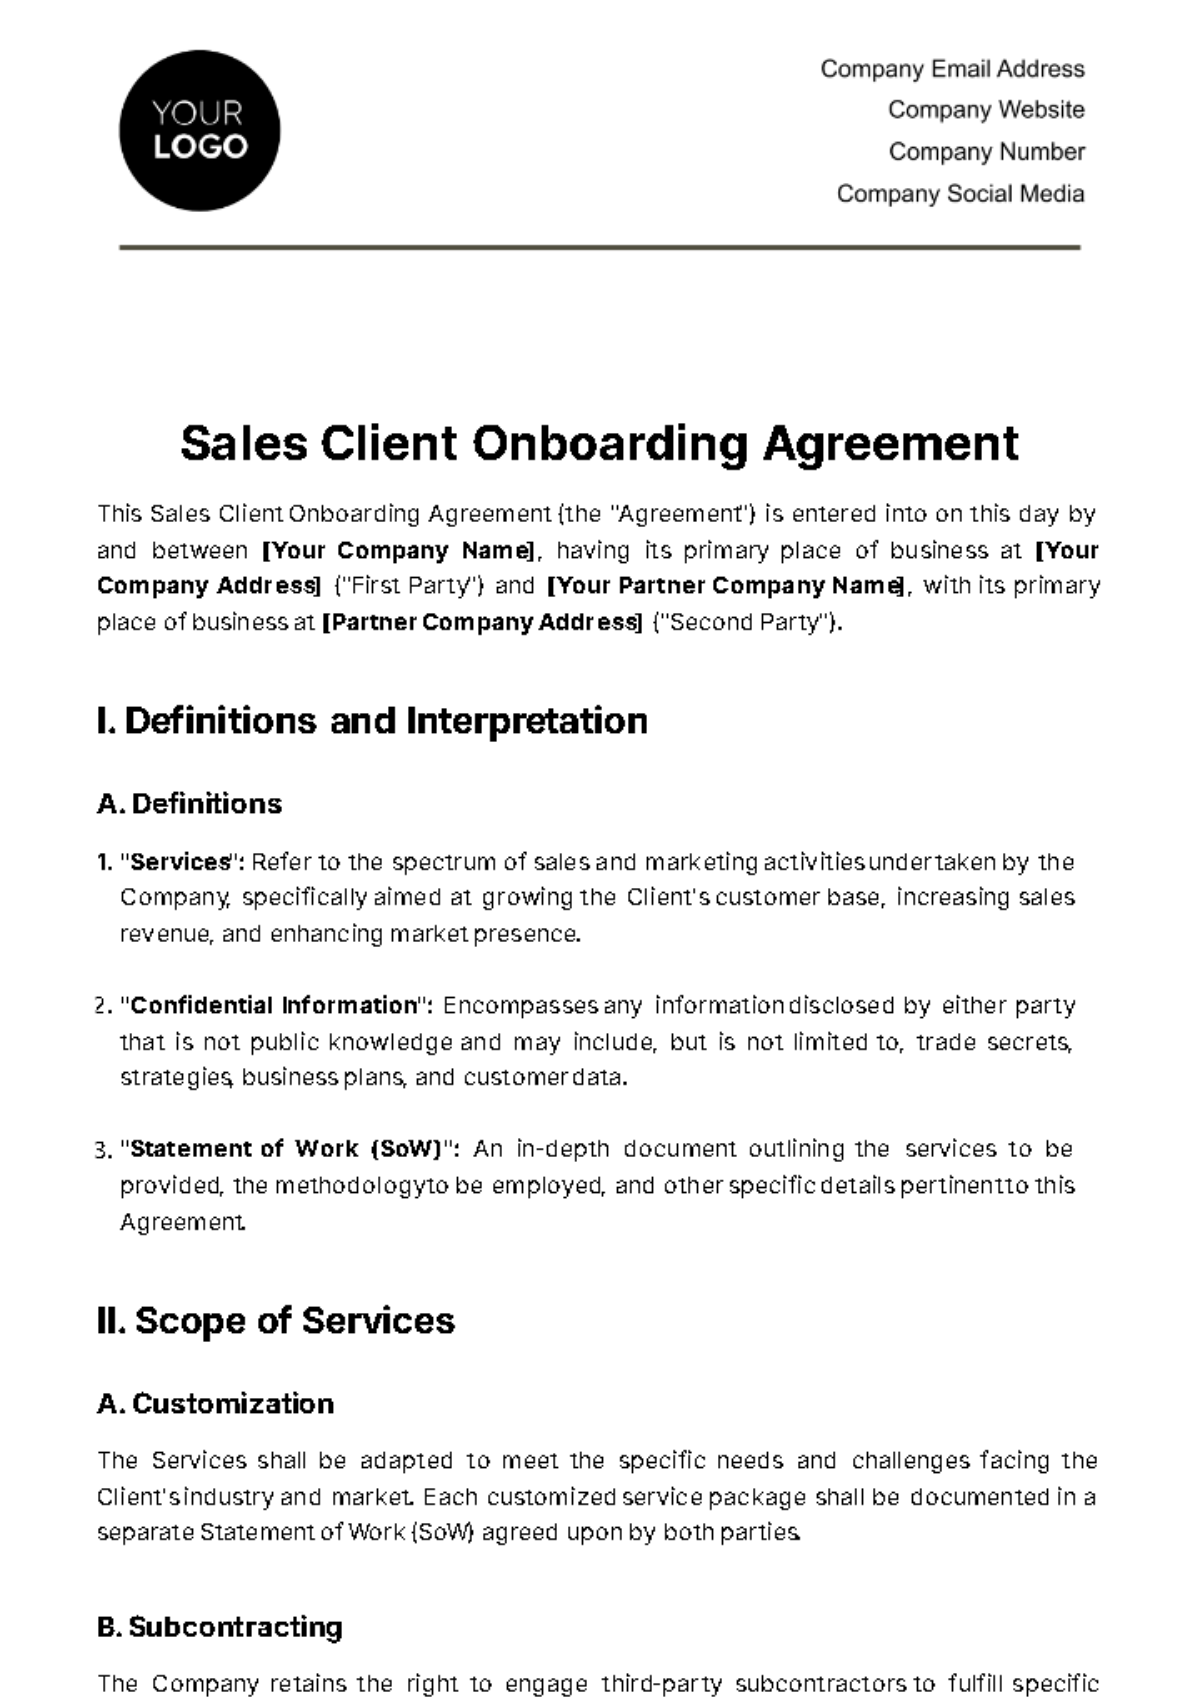 Free Sales Client Onboarding Agreement Template